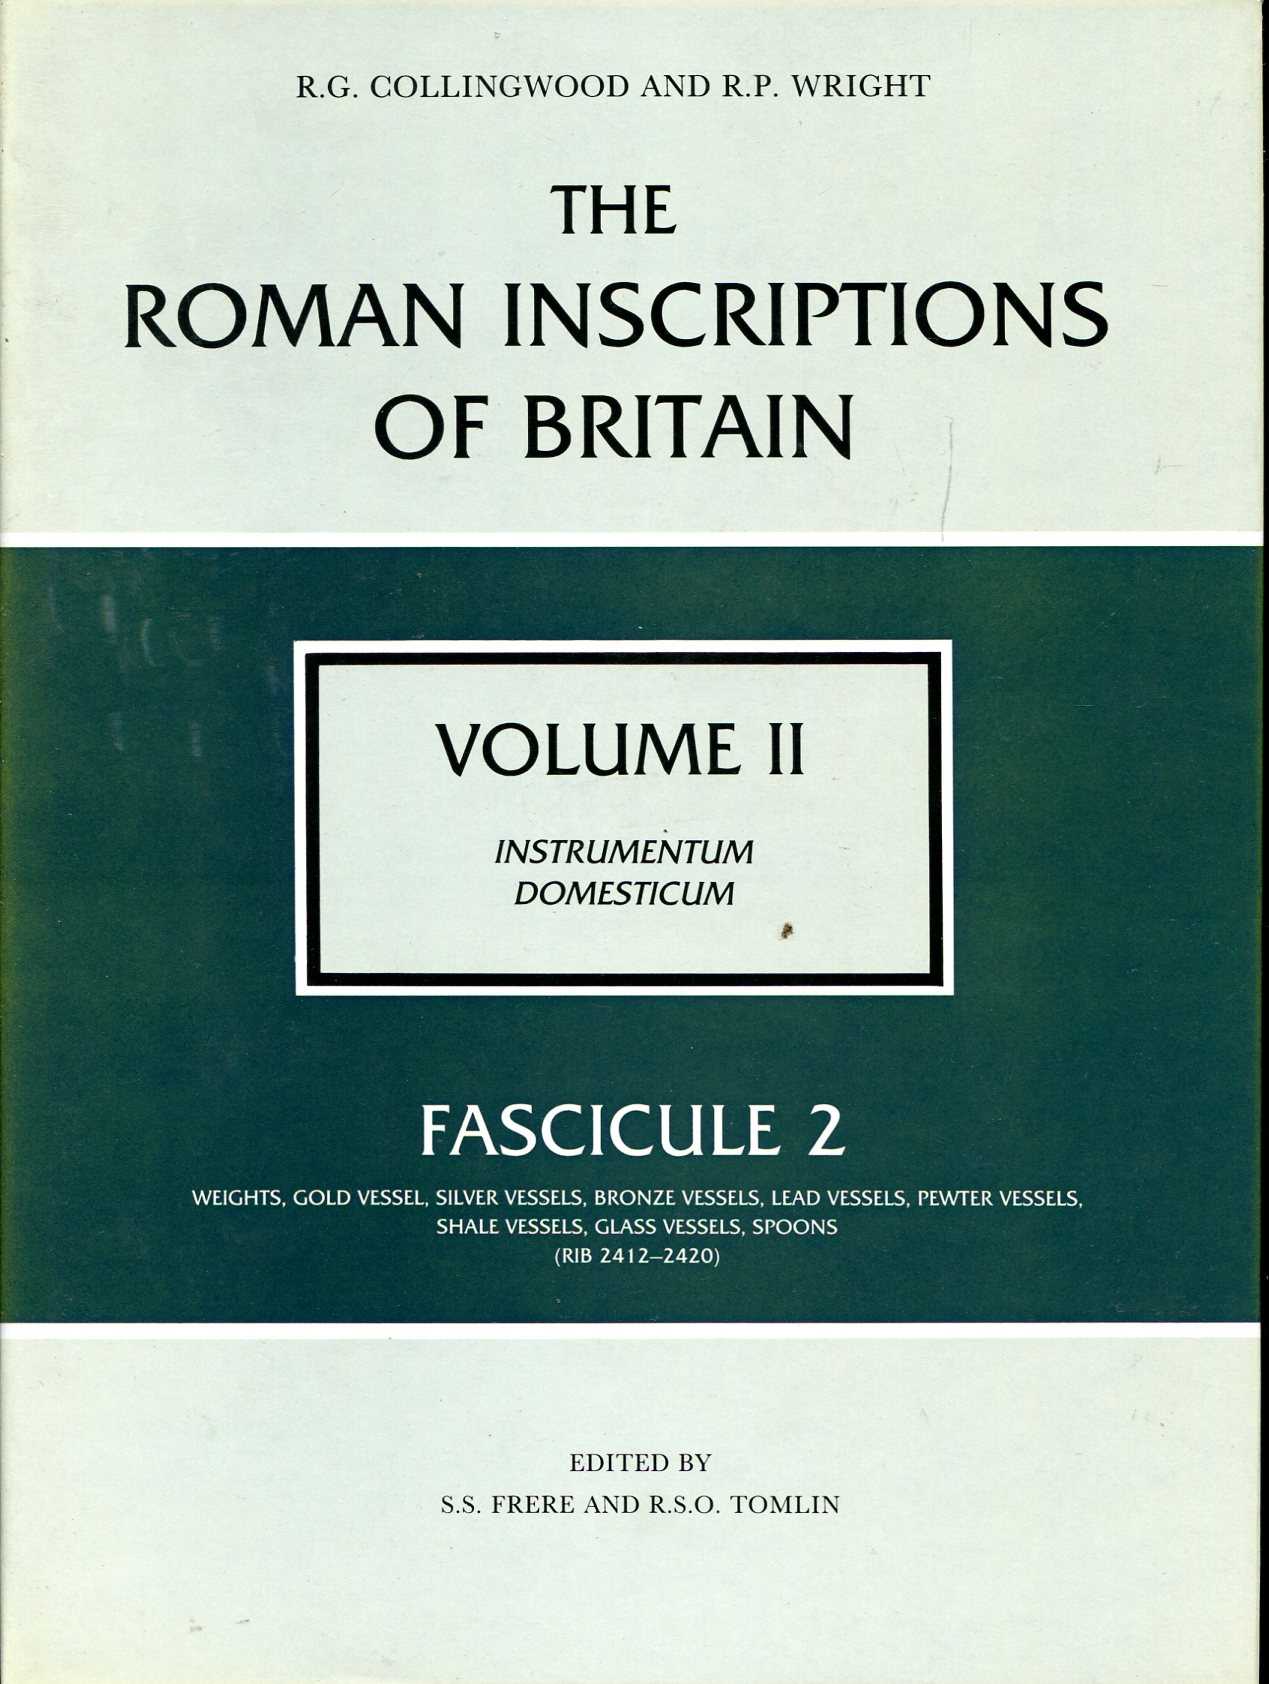 The Roman Inscriptions of Britain: volume II Instrumentum Domesticum, Fasicule 2 : Weights, Gold Vessel, Silver Vessels, Bronze Vessels, Lead Vessels, Pewter Vessels, Shale Vessels, Glass Vessels, Spoons - Collingwood, R. G & Wright, R.P. (edited by S S Frere & R S O Tomlin)